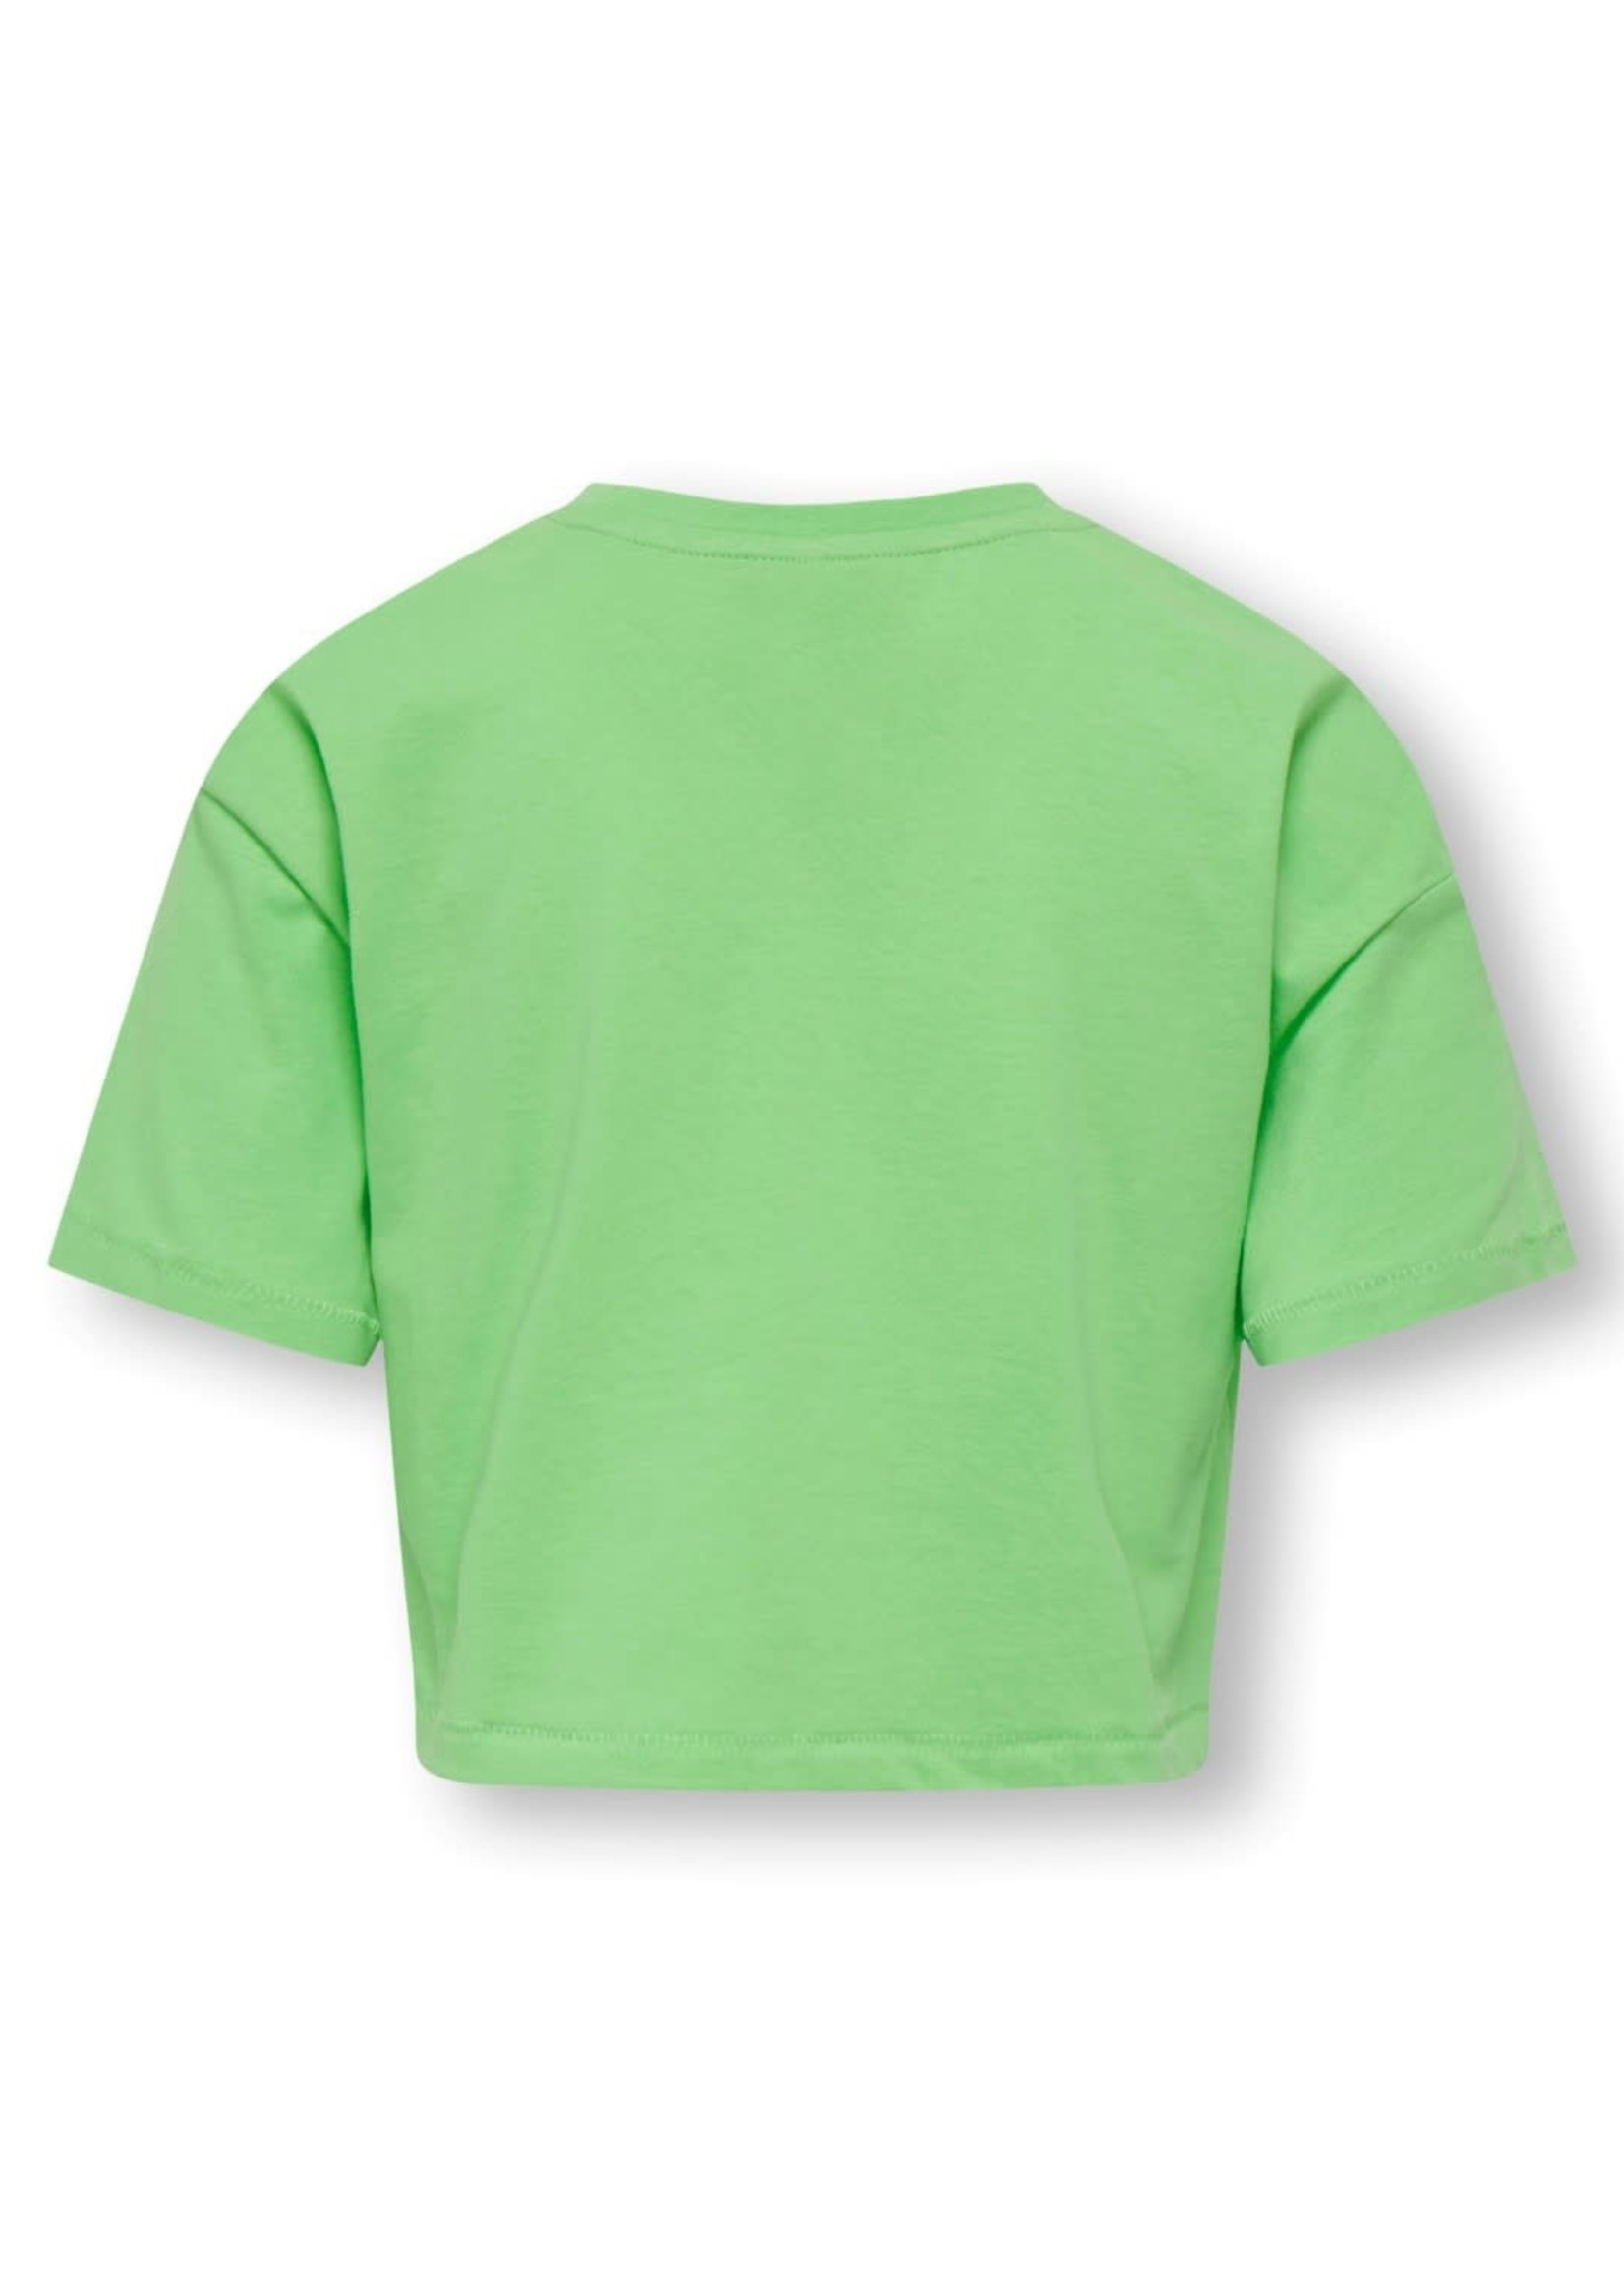 KIDS ONLY KO Olivia Loose State Top Summer Green